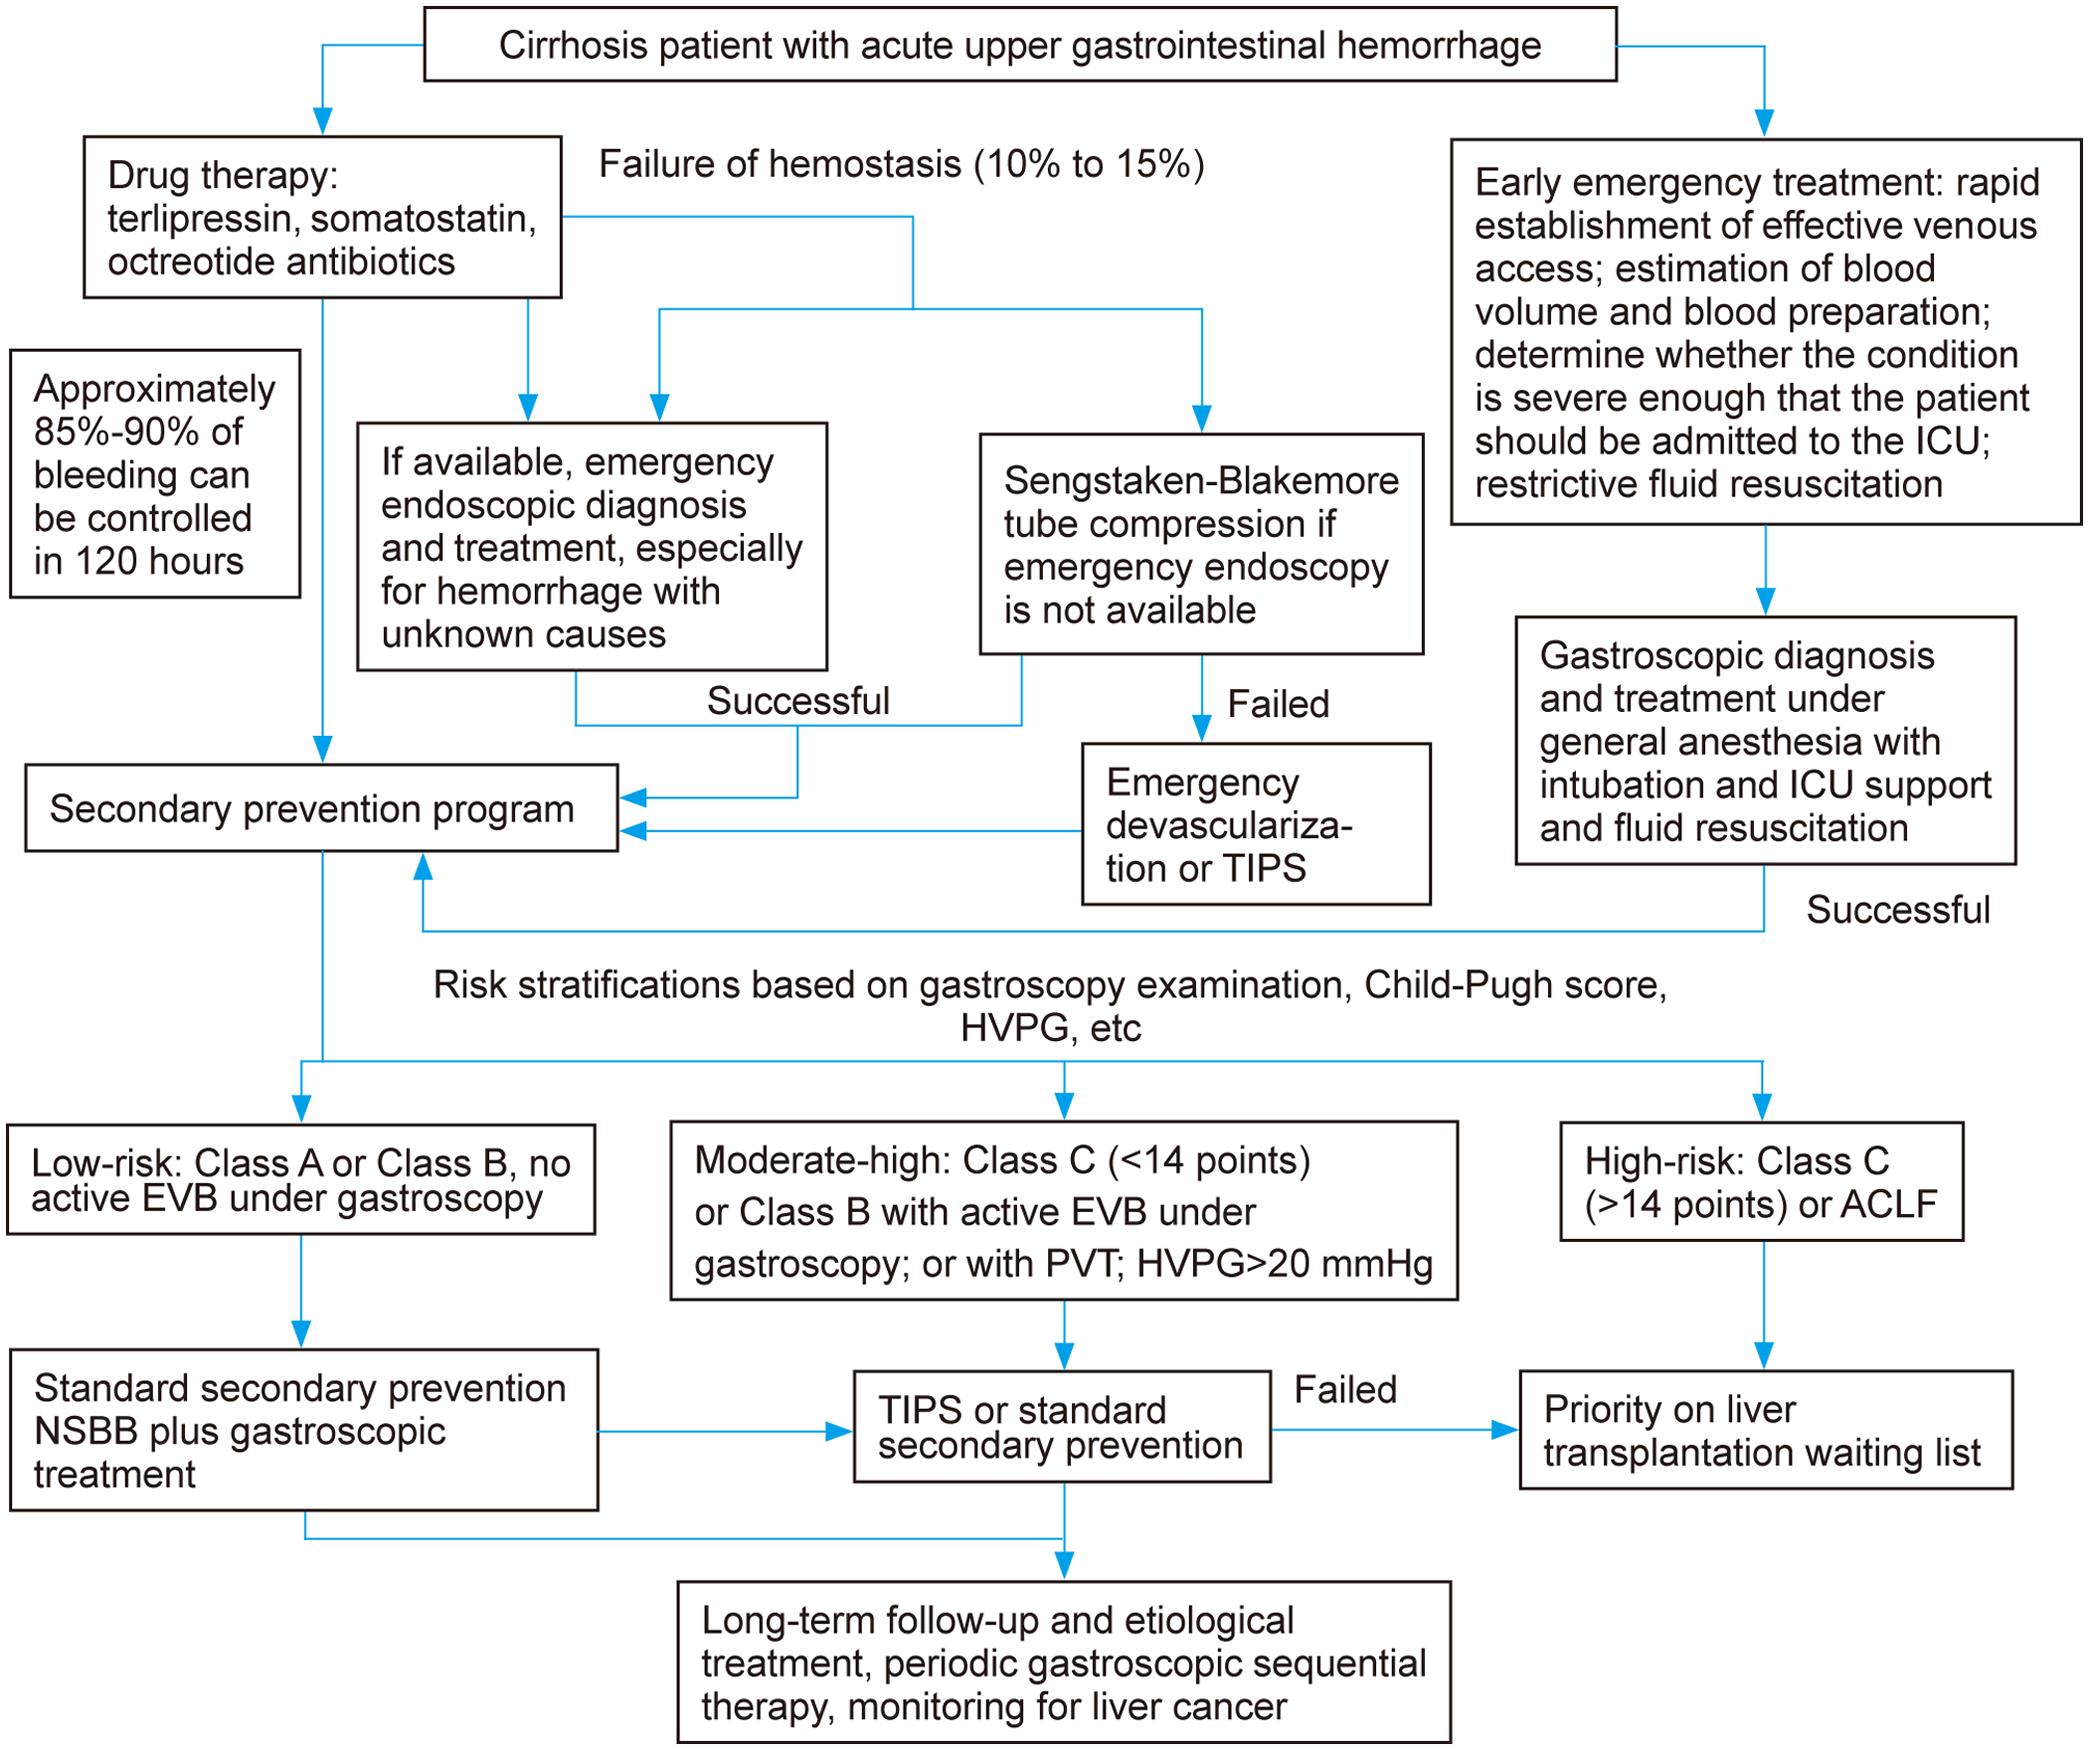 Recommended flow of clinical management of acute upper gastrointestinal bleeding in liver cirrhosis.